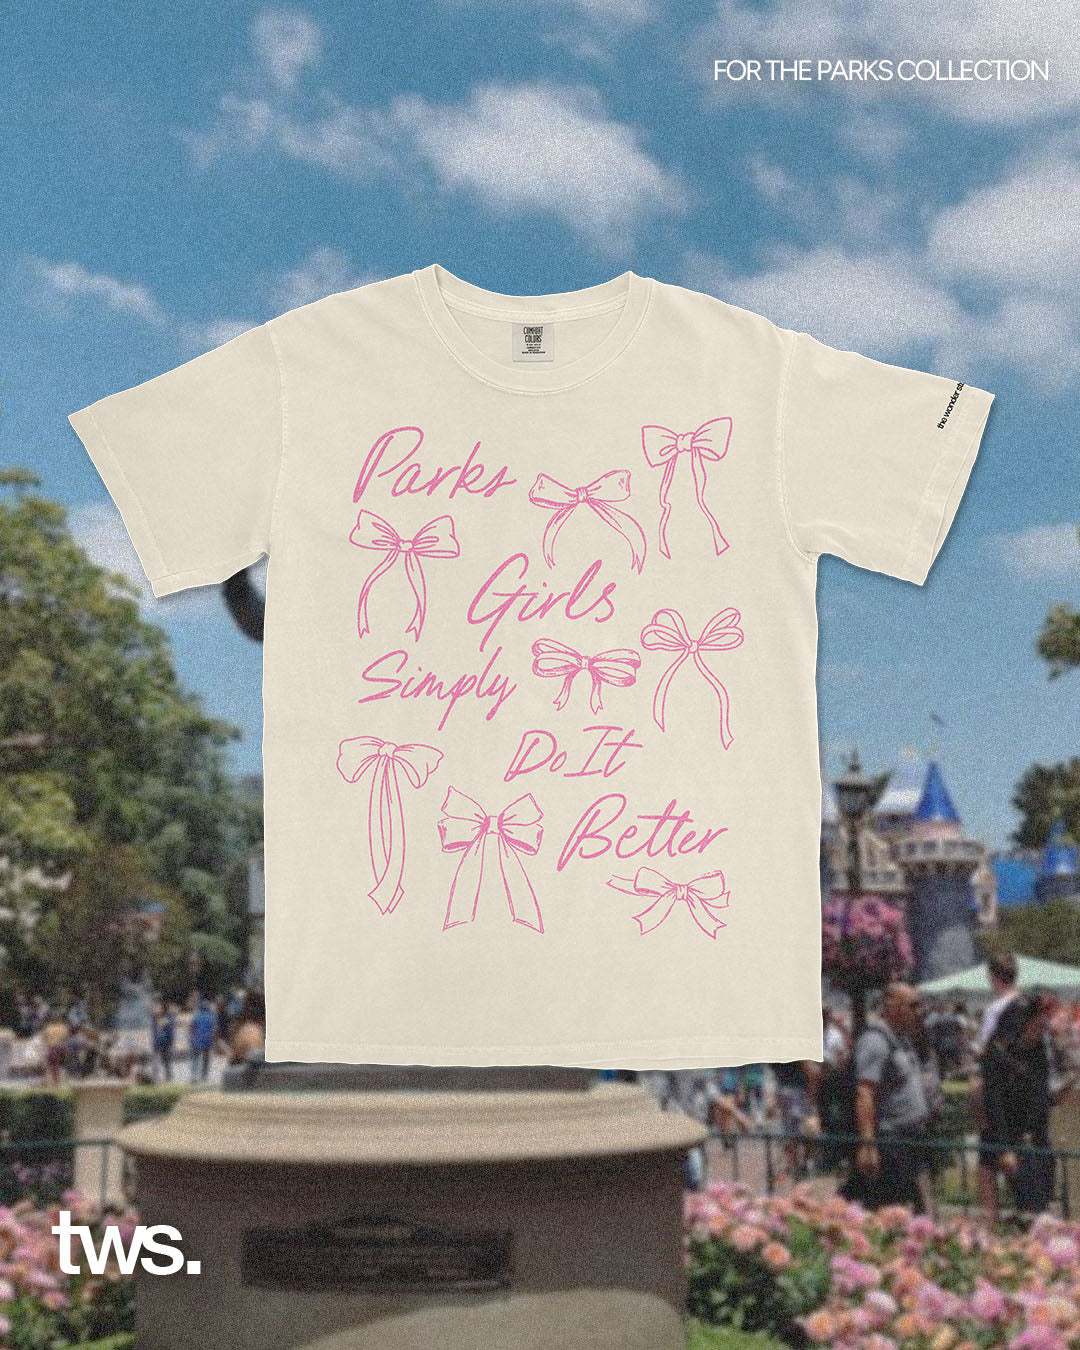 The Parks Girls Tee